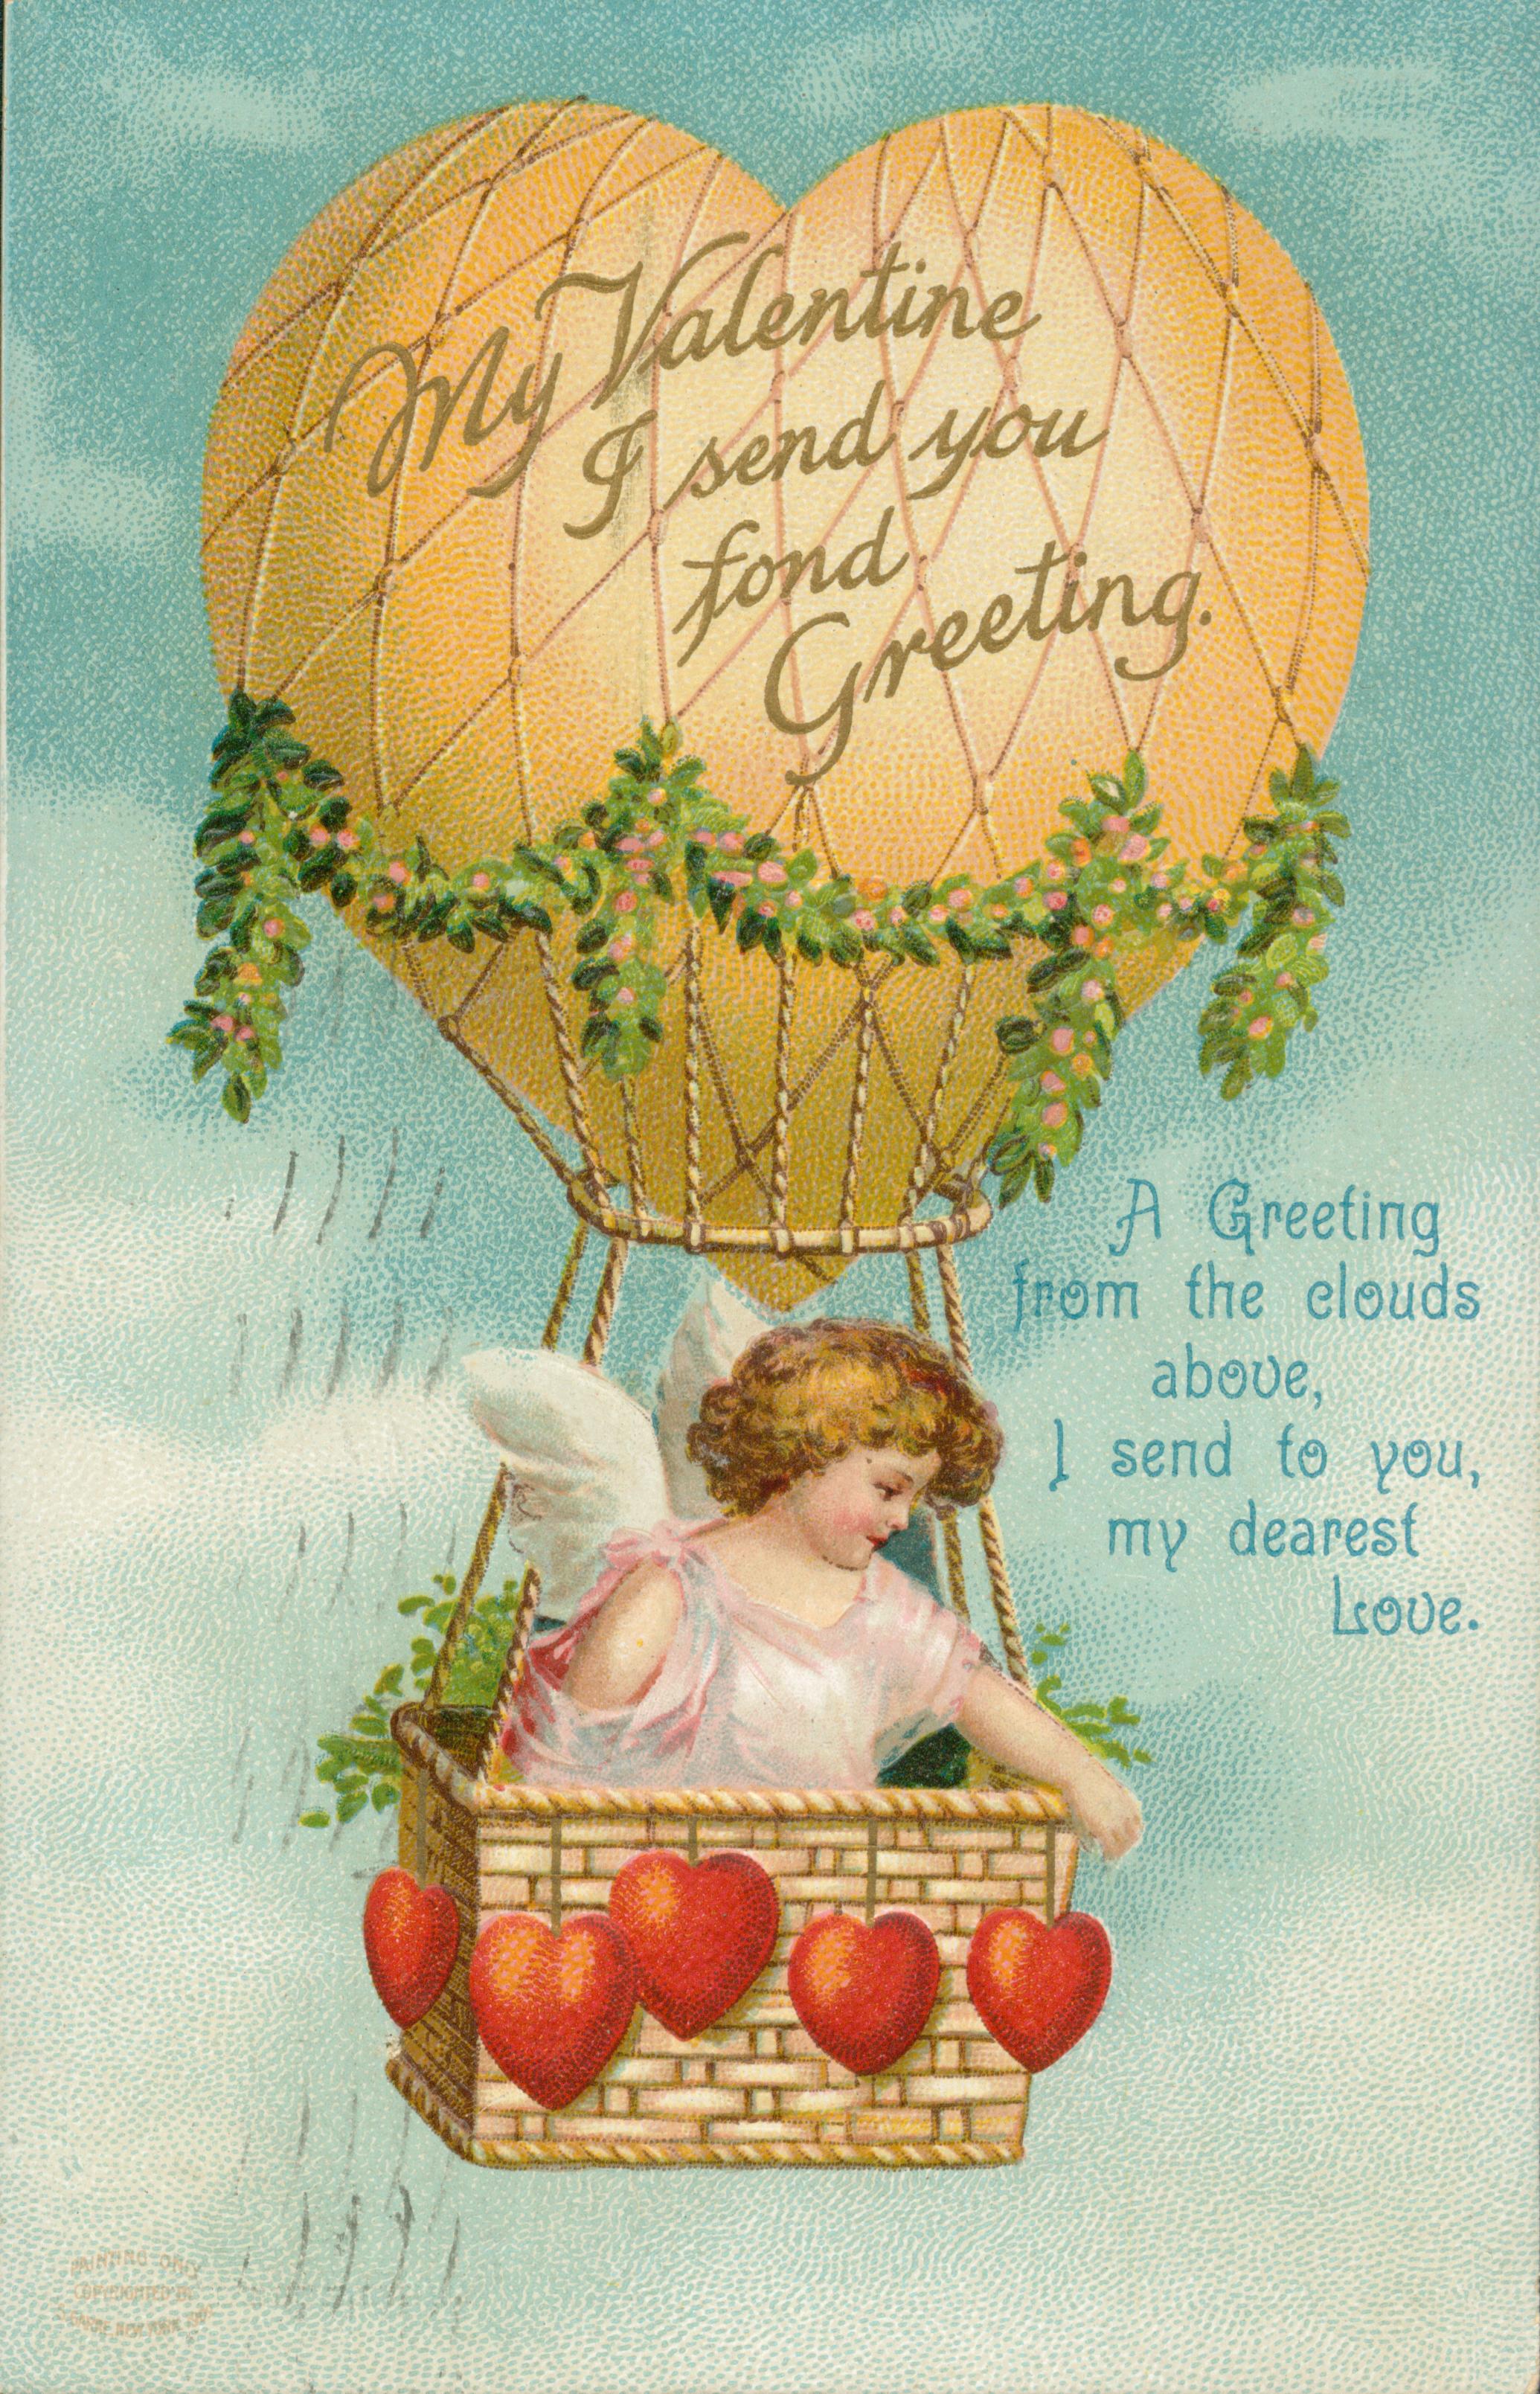 Shows an angel in a hot air balloon with a poem off to the side